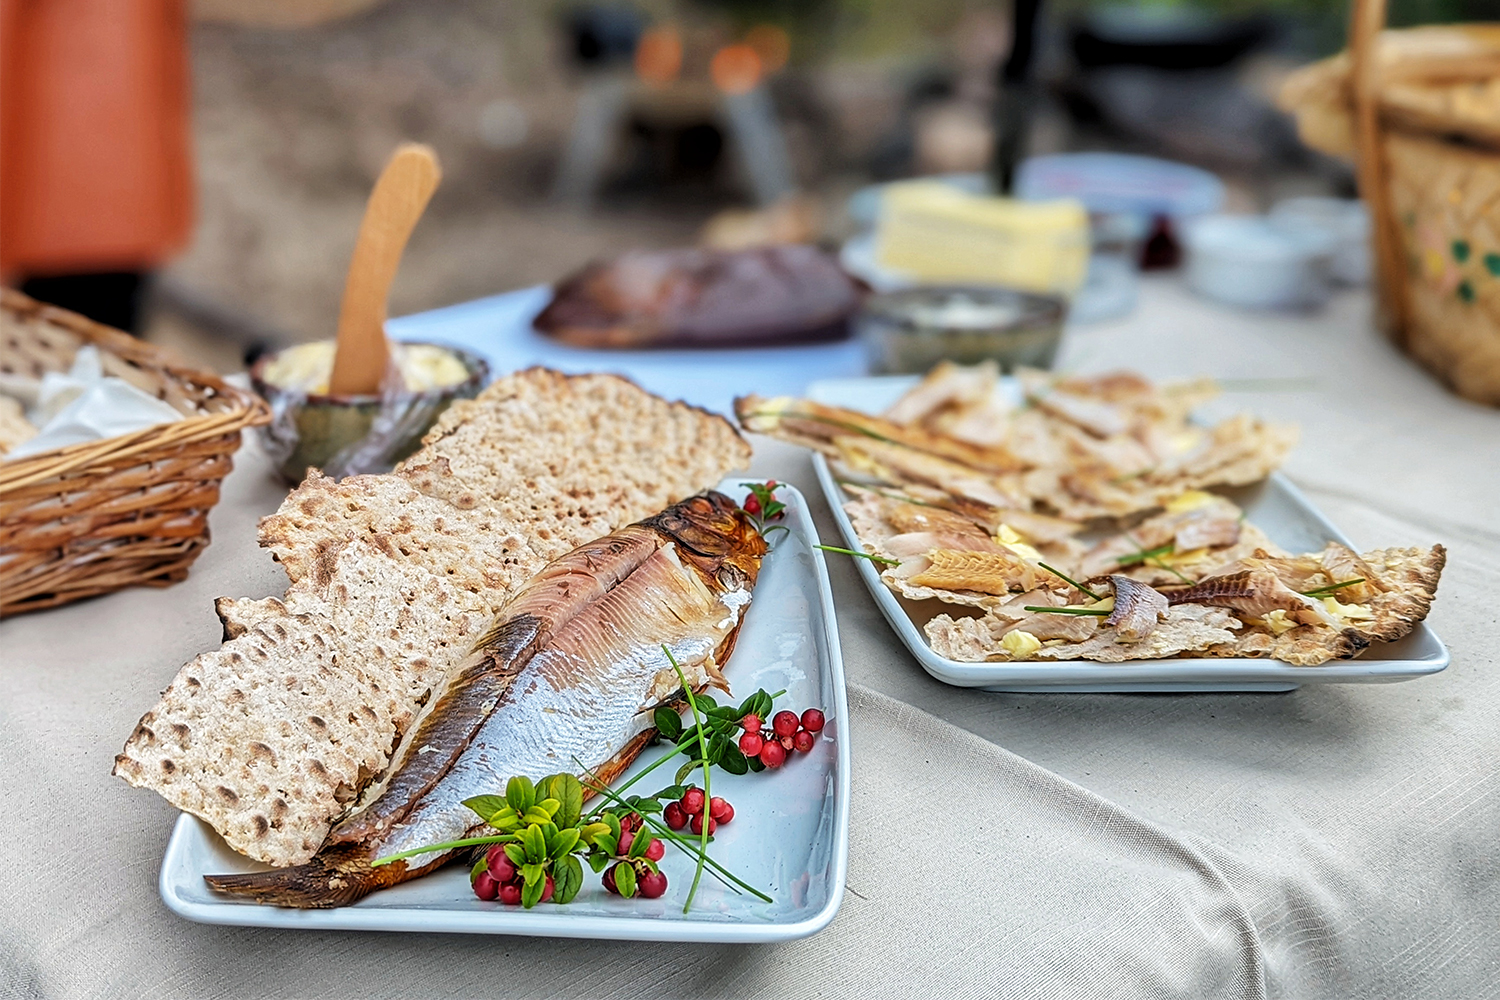 A picnic of fish, bread and foraged ingredients in Swedish Lapland